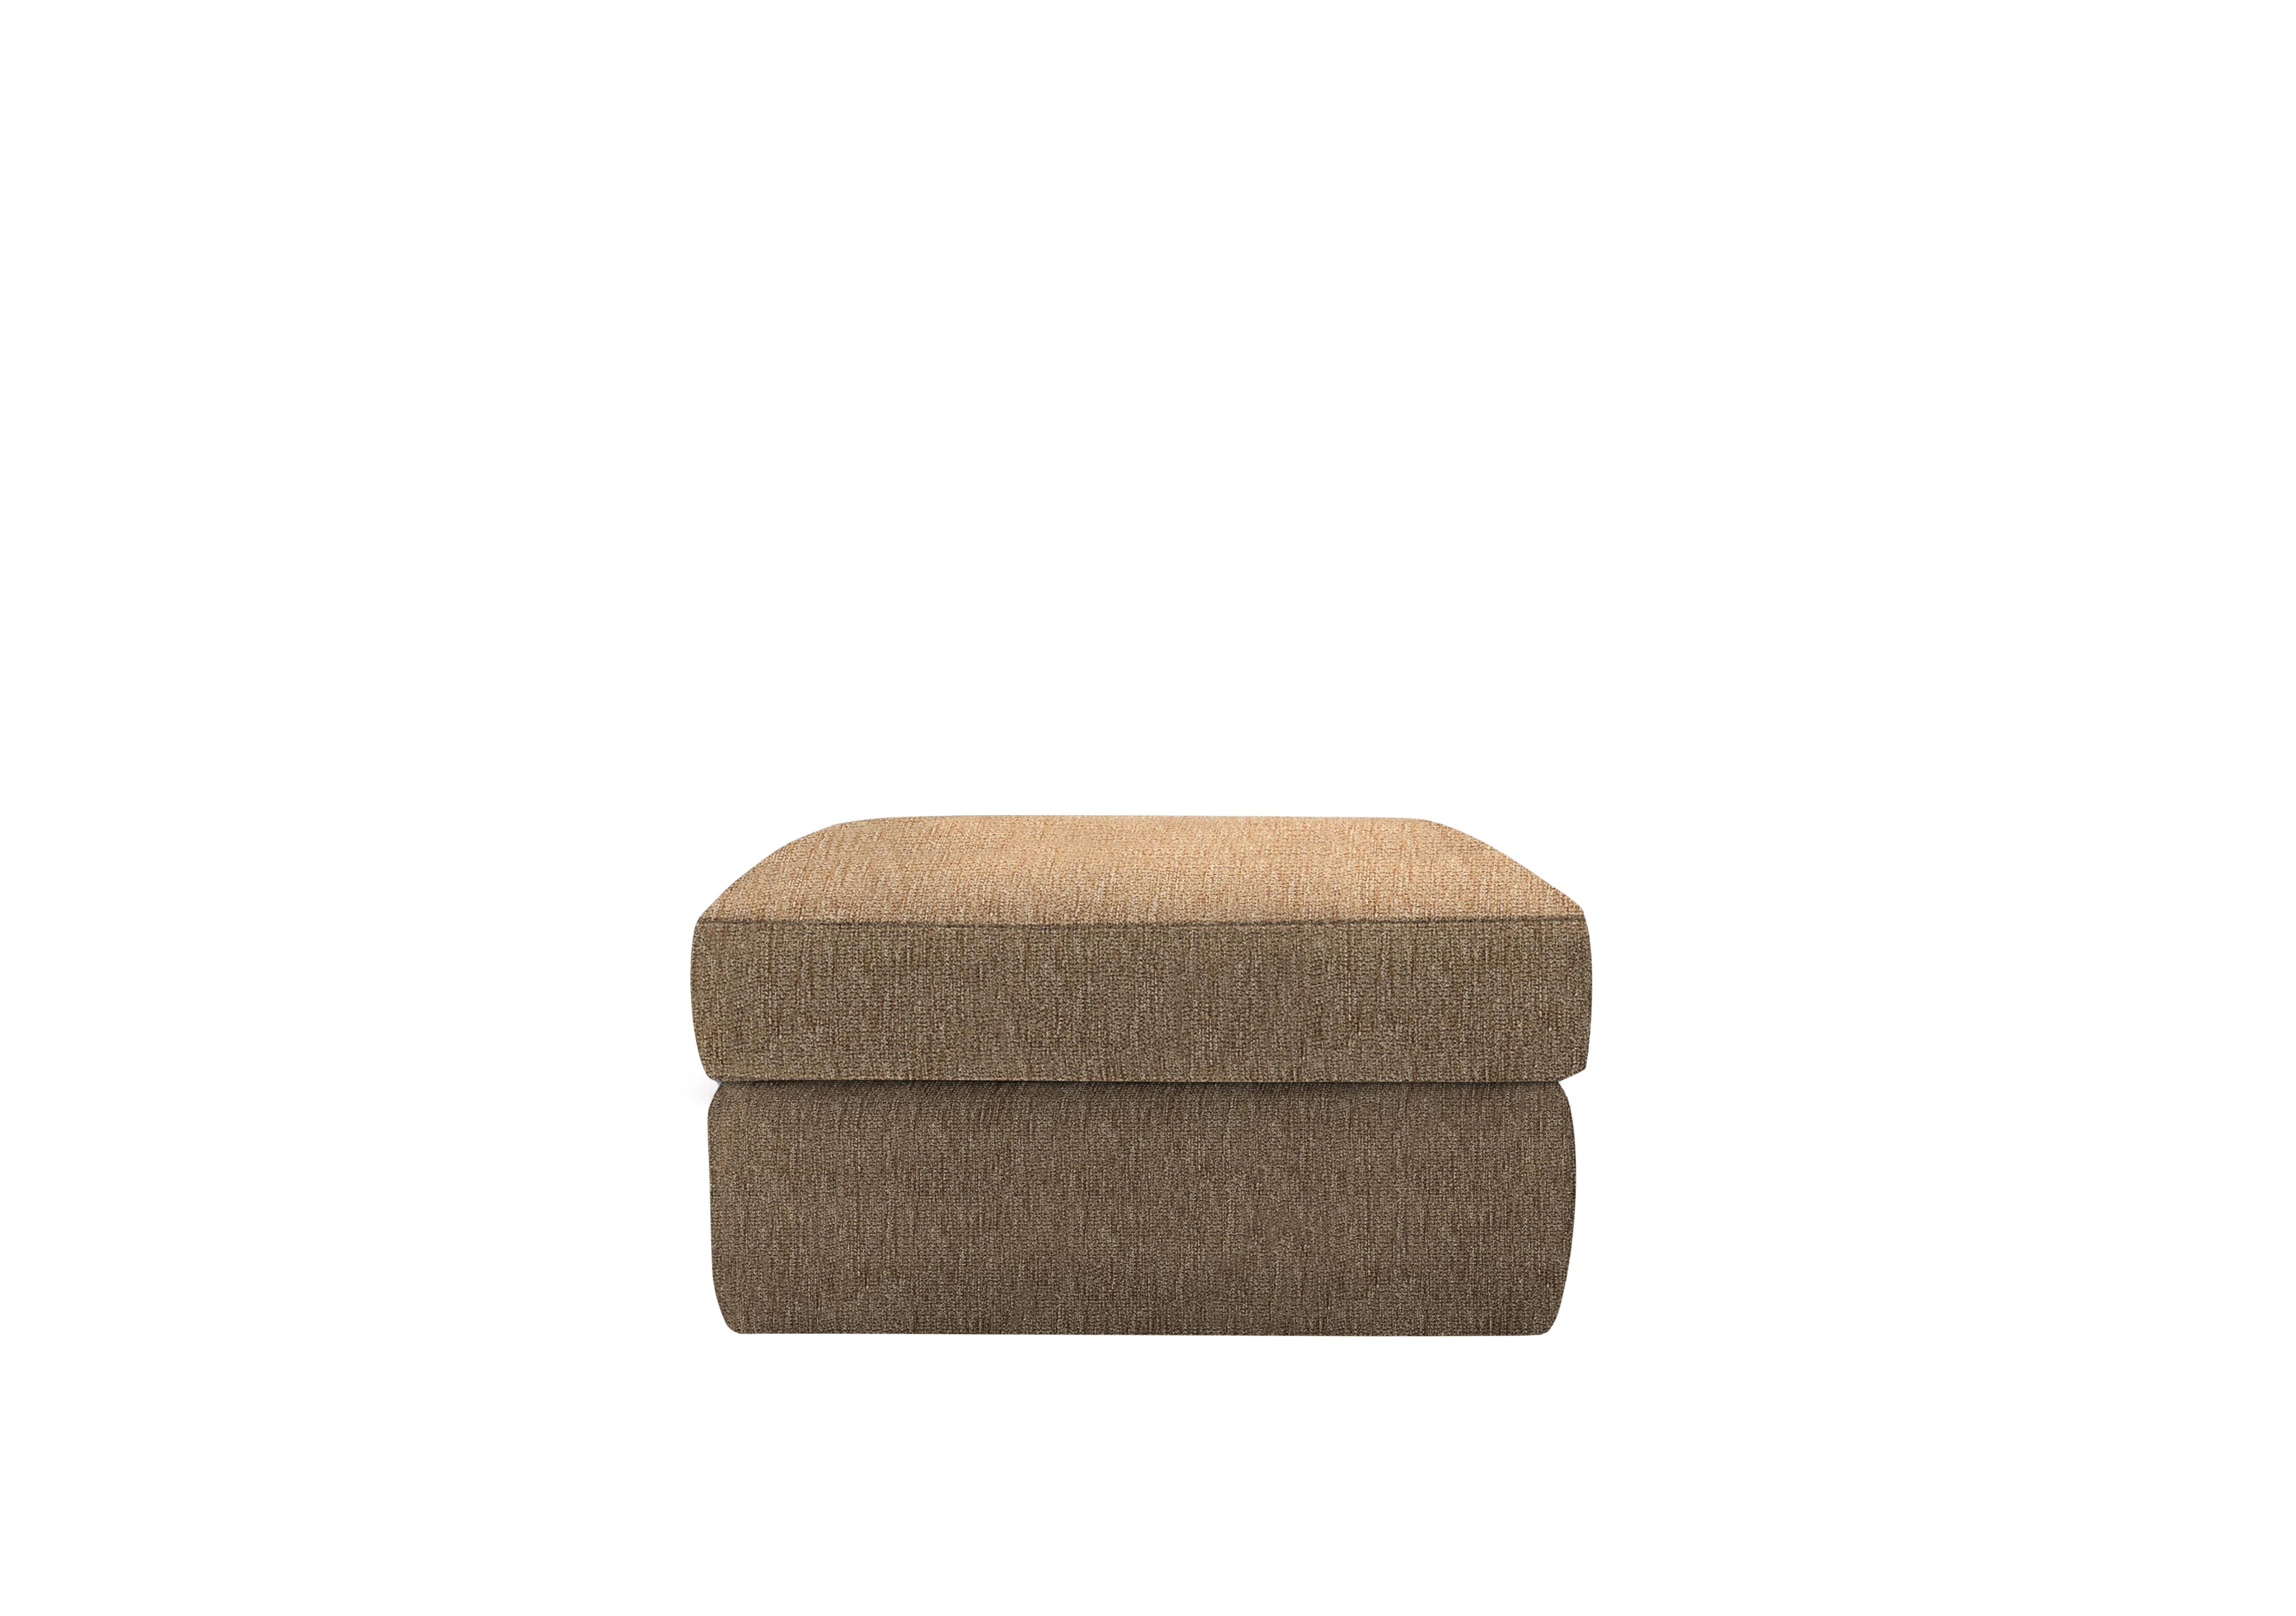 Seattle Fabric Storage Footstool in A070 Boucle Cocoa on Furniture Village